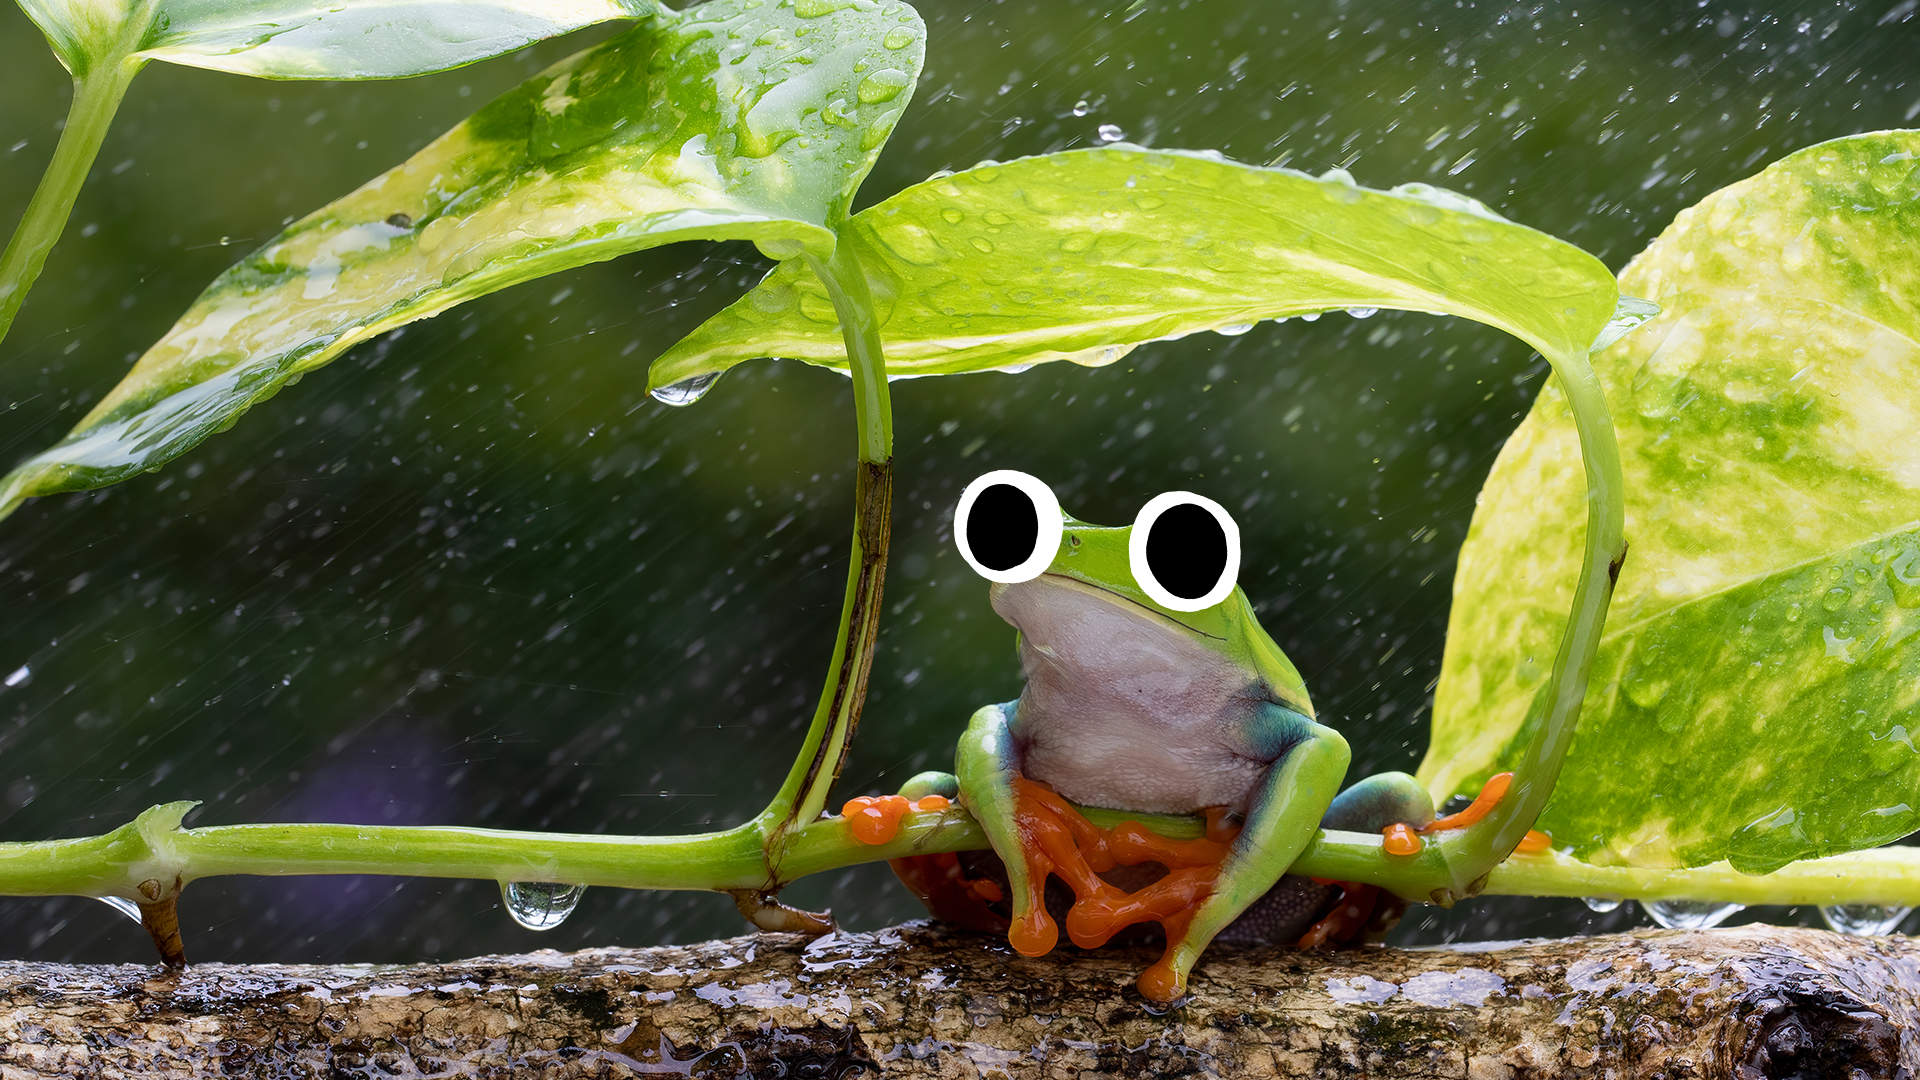 Frog sheltering from the rain